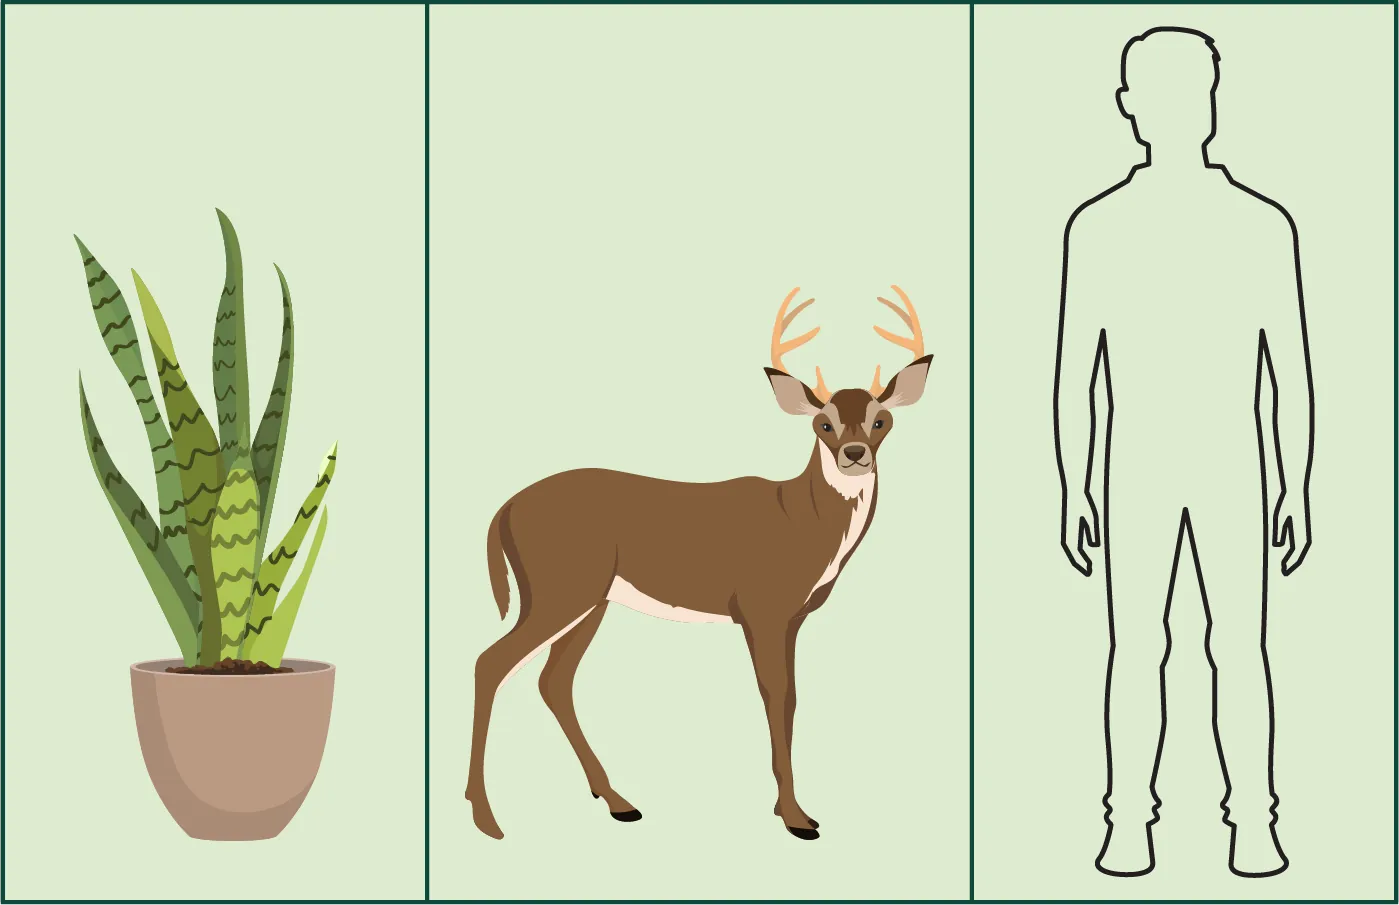 Three panels, the first containing a sketch of a plant, the second a picture of a deer, and the third an outline of a human being.